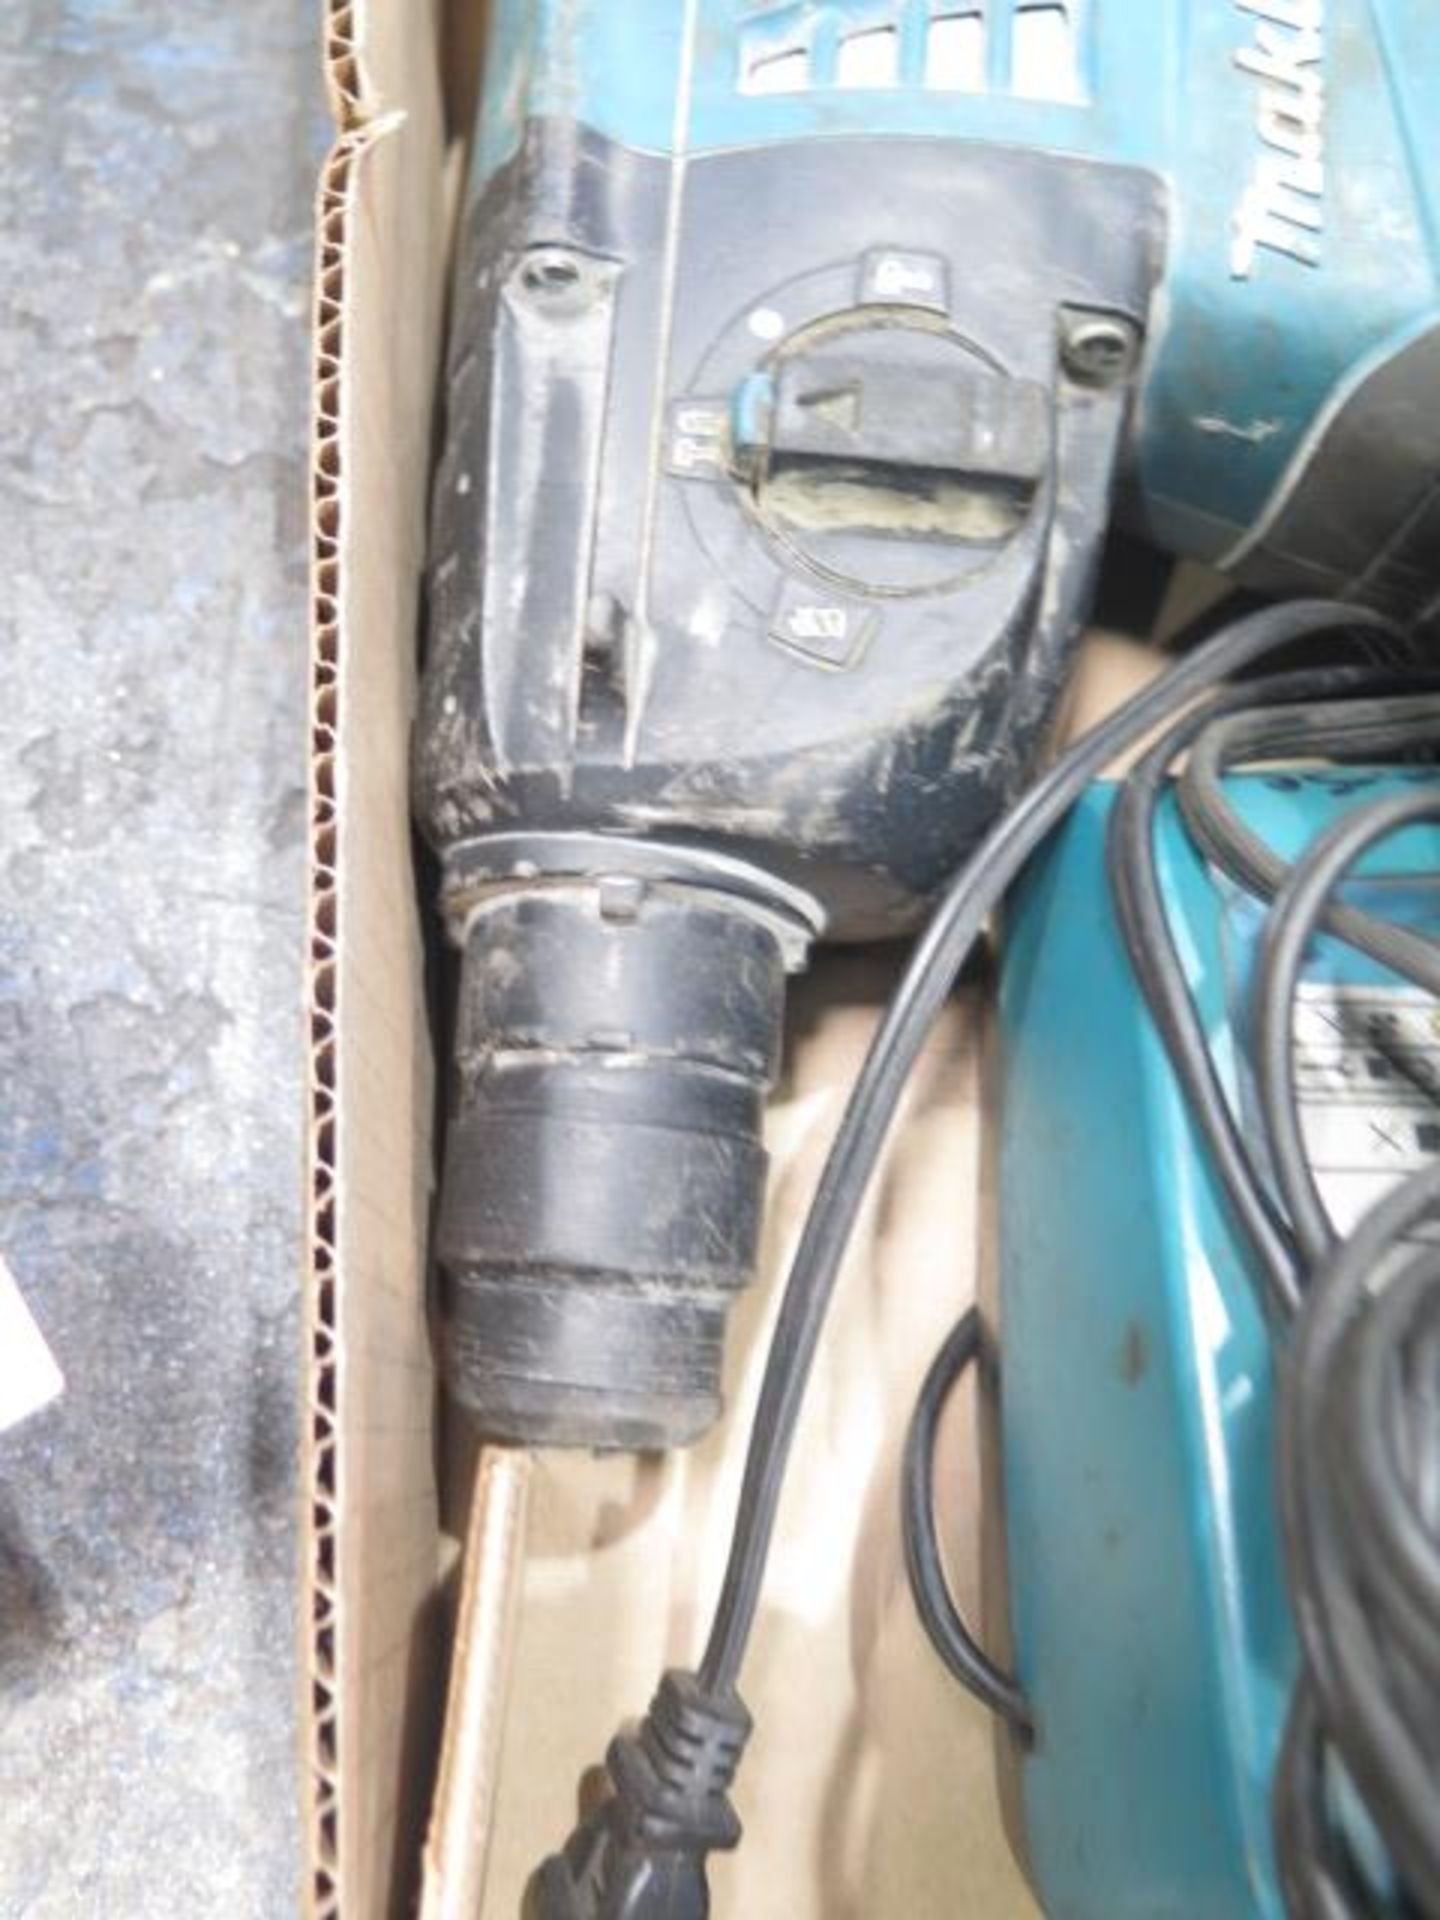 Makita 36V Cordless Hammer Drill w/ Charger (SOLD AS-IS - NO WARRANTY) - Image 3 of 5